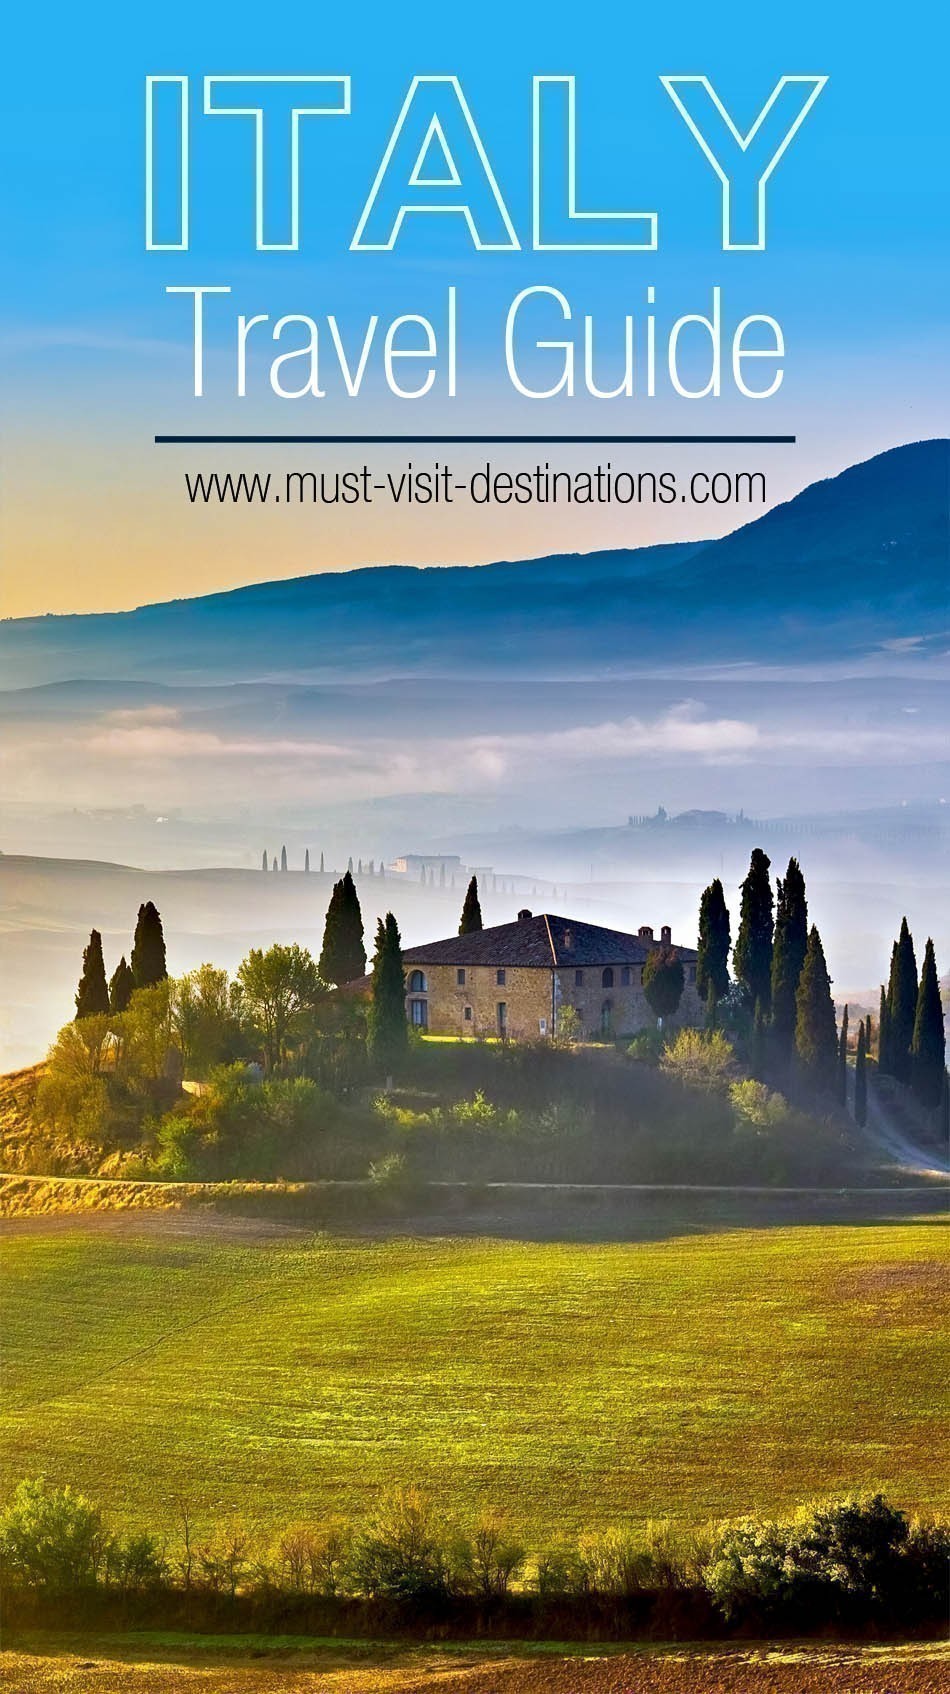 Italy Travel Guide #italy #travel #guide